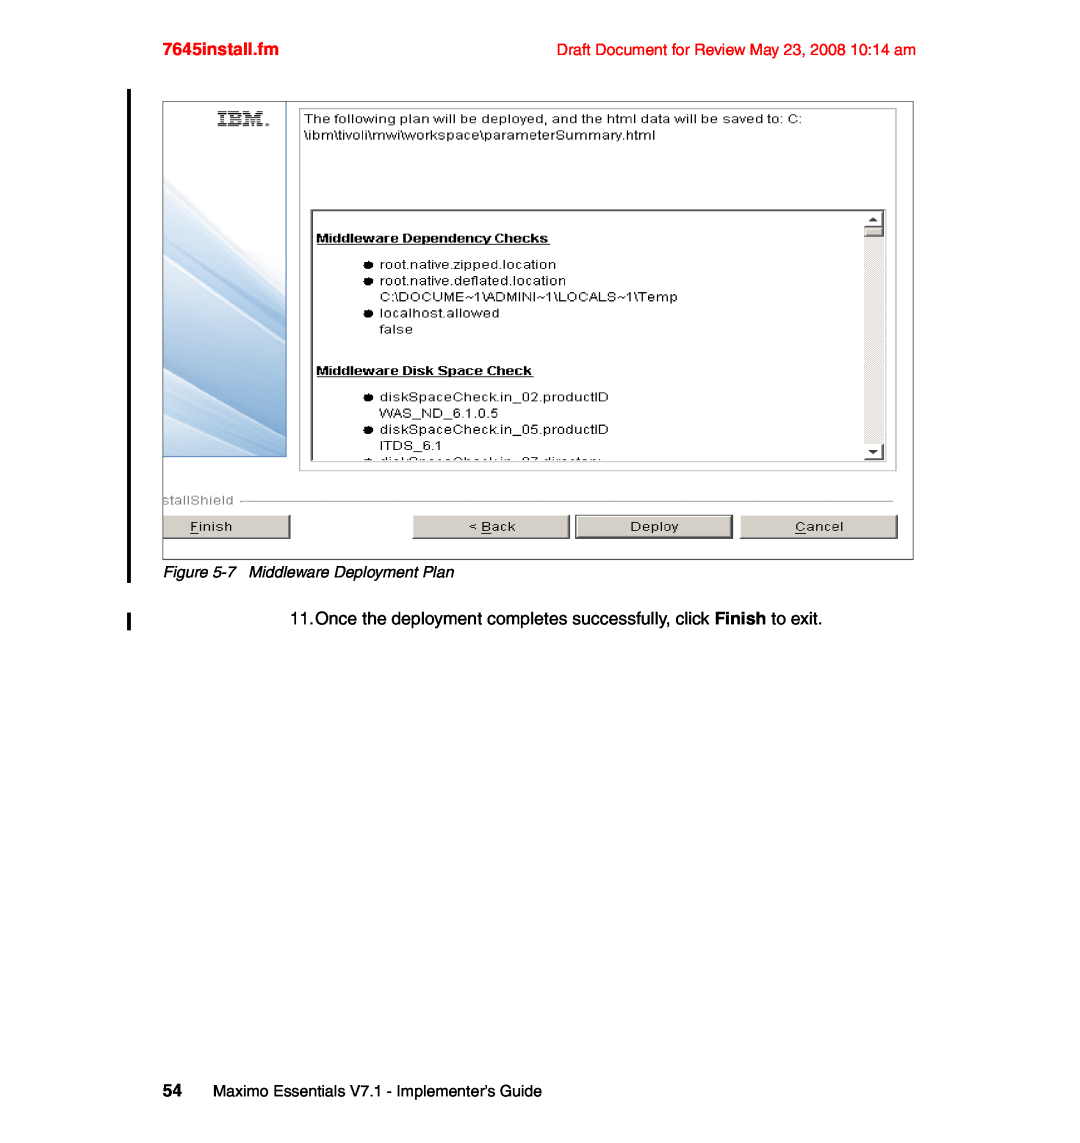 IBM SG24-7645-00 manual 7645install.fm, 7Middleware Deployment Plan, 54Maximo Essentials V7.1 - Implementer’s Guide 